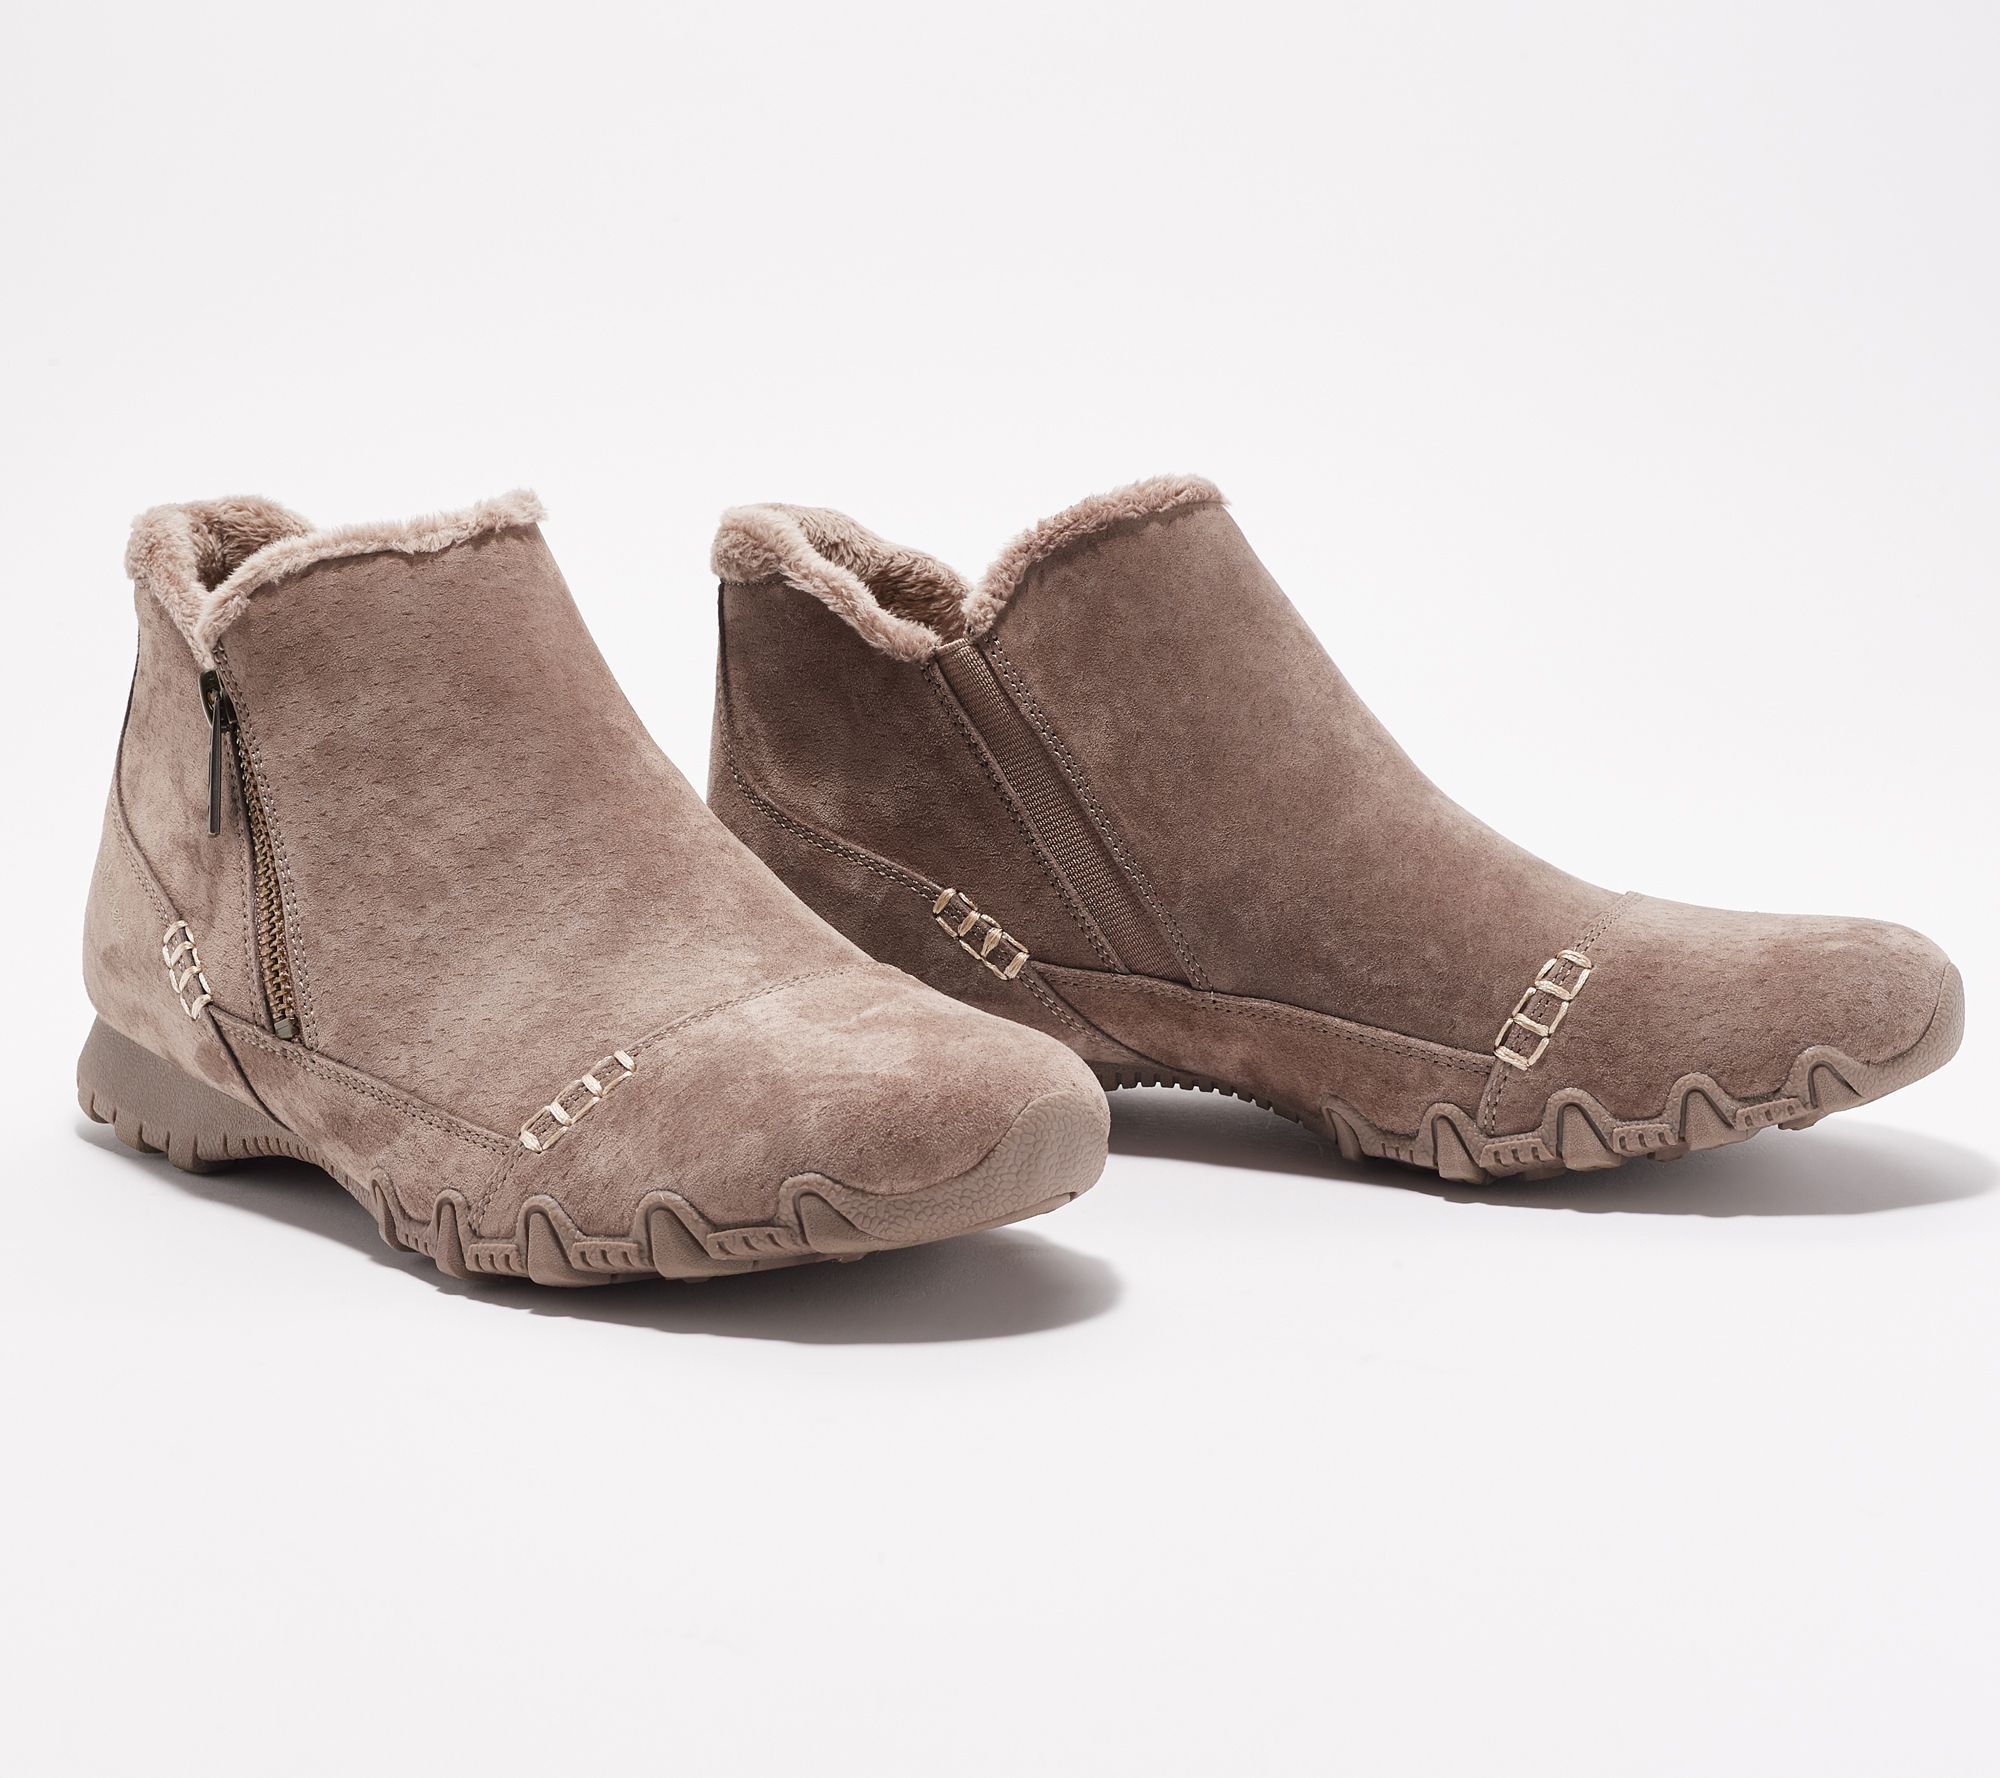 Nøjagtighed transaktion anbefale Skechers Relaxed Fit Suede Biker Ankle Boots - Earthy Chic - QVC.com